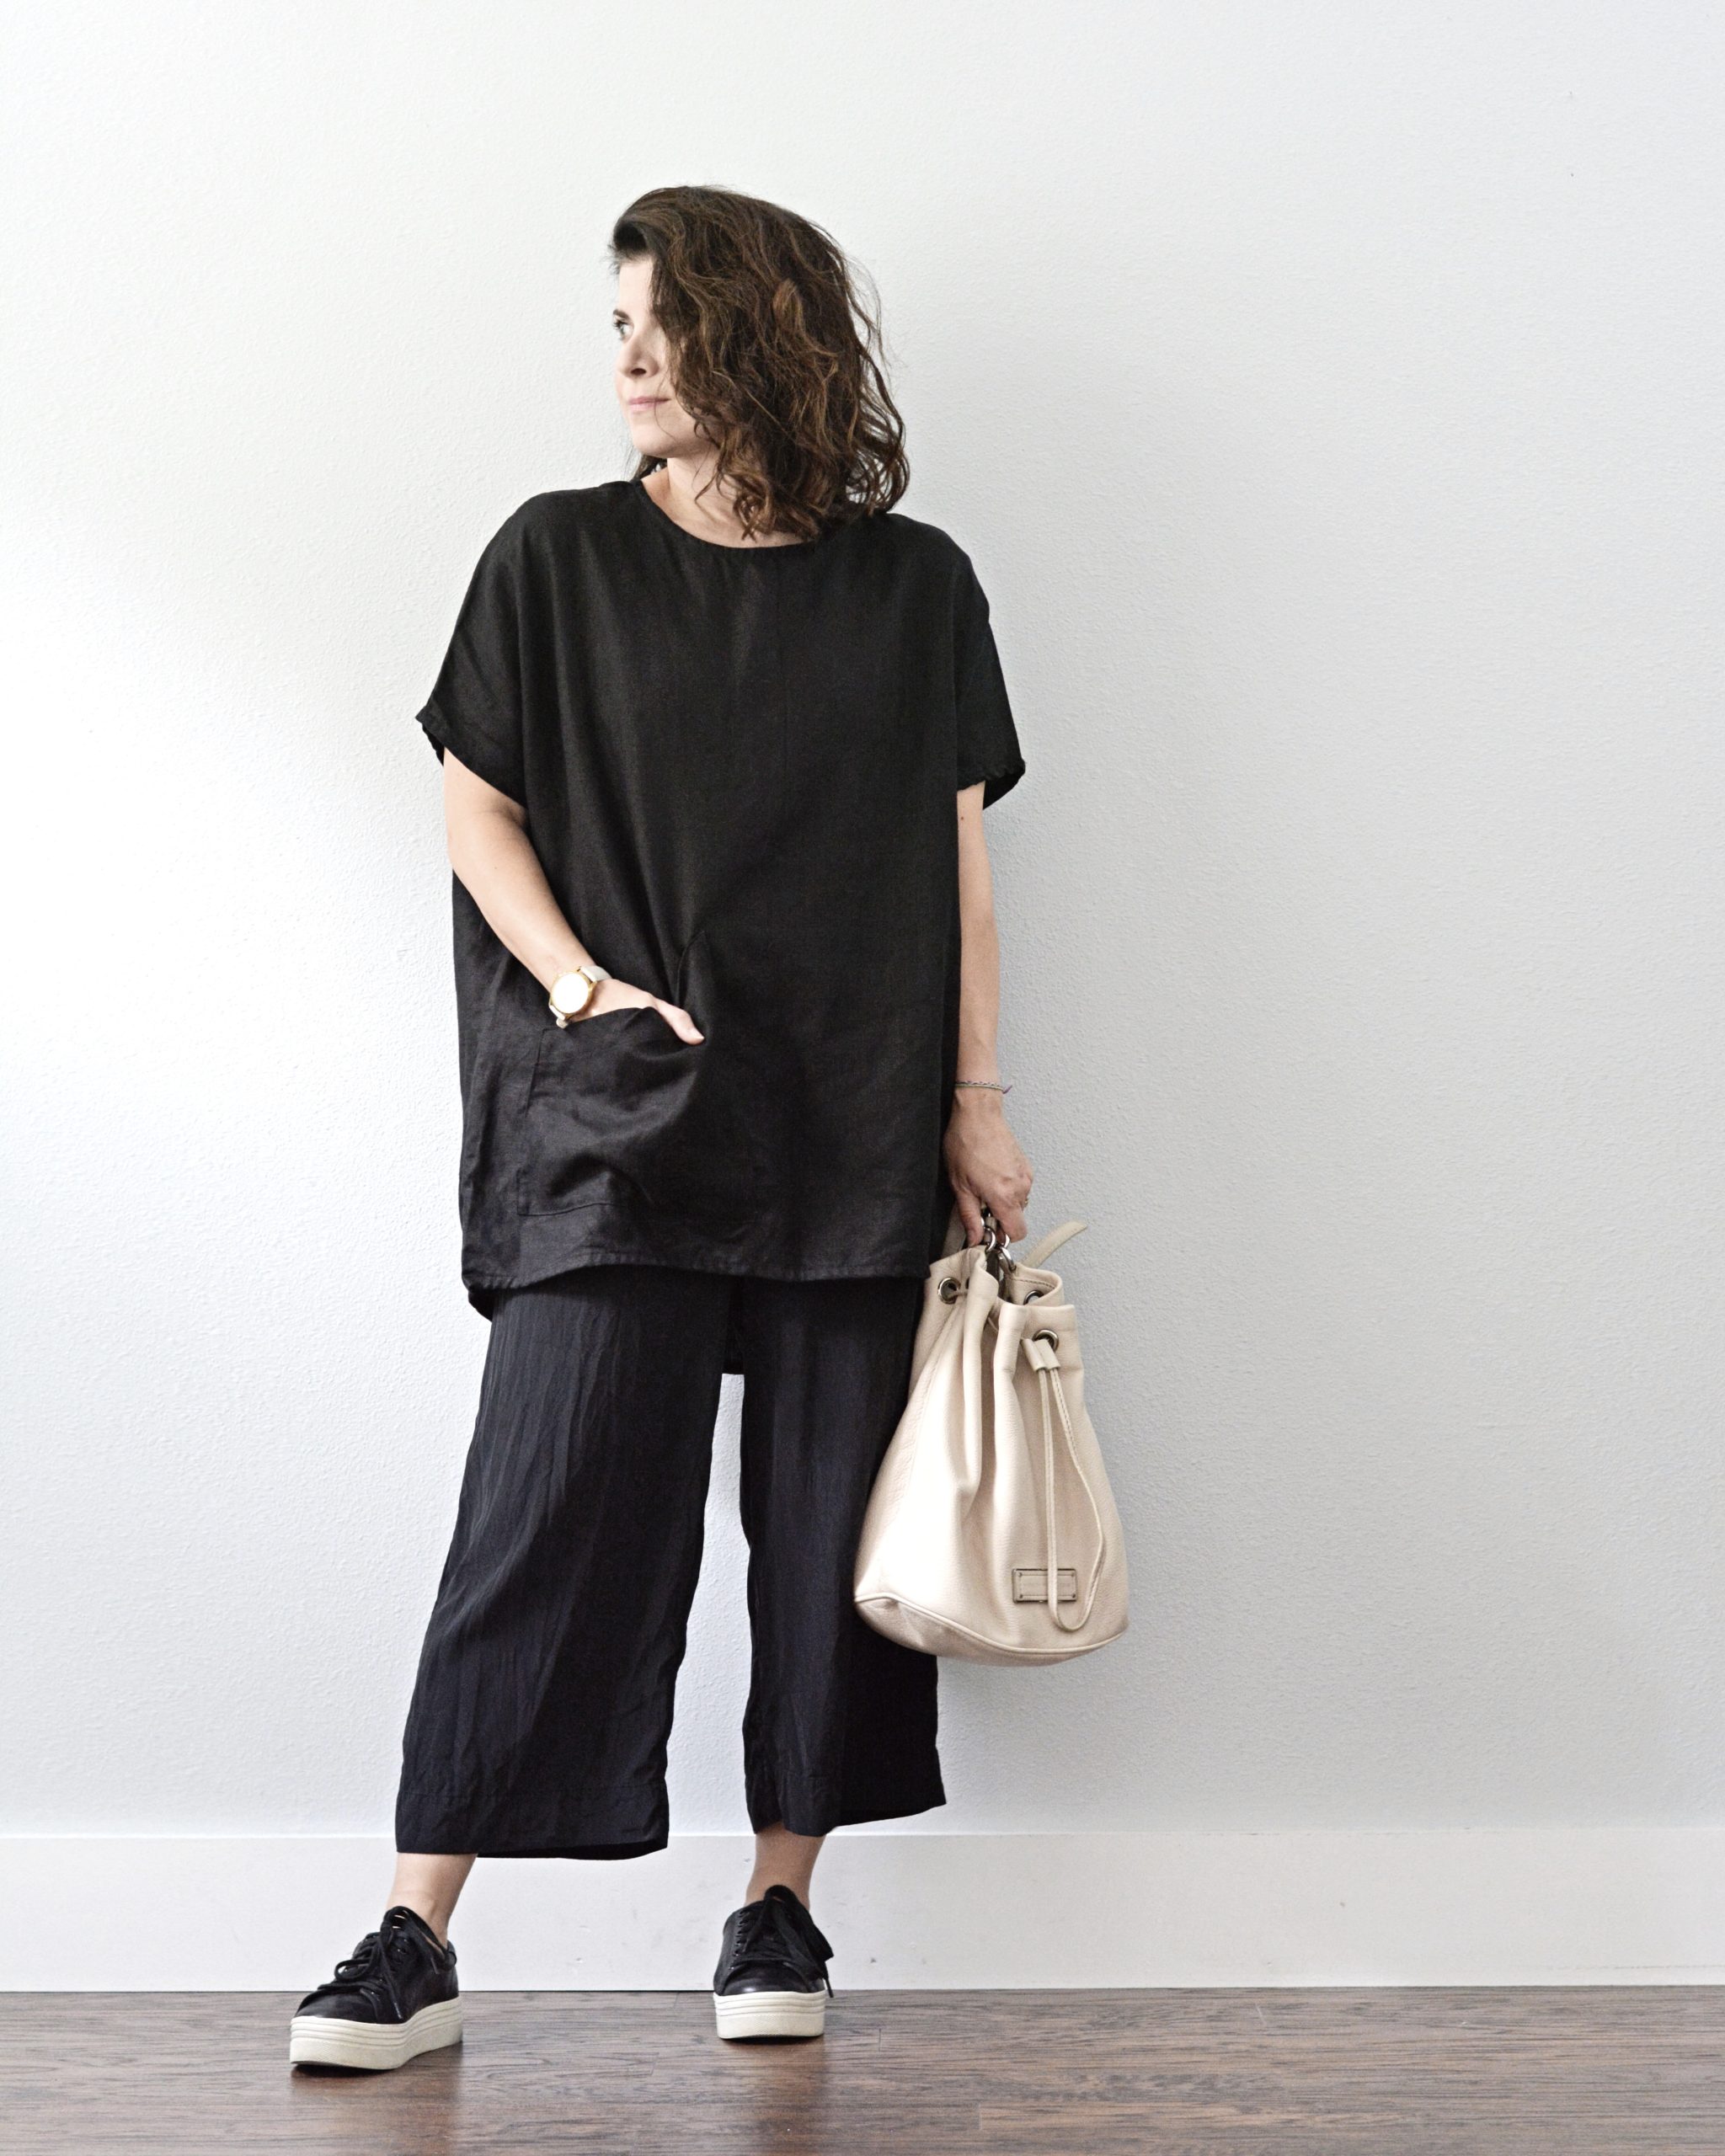 A white woman is standing against a light grey wall. She is wearing a black tunic top over a black wide leg jumpsuit so the jumpsuit looks like pants. She is wearing black sneakers with a white platform and holding a white handbag with her left hand. Her right hand is in her tunic pocket.